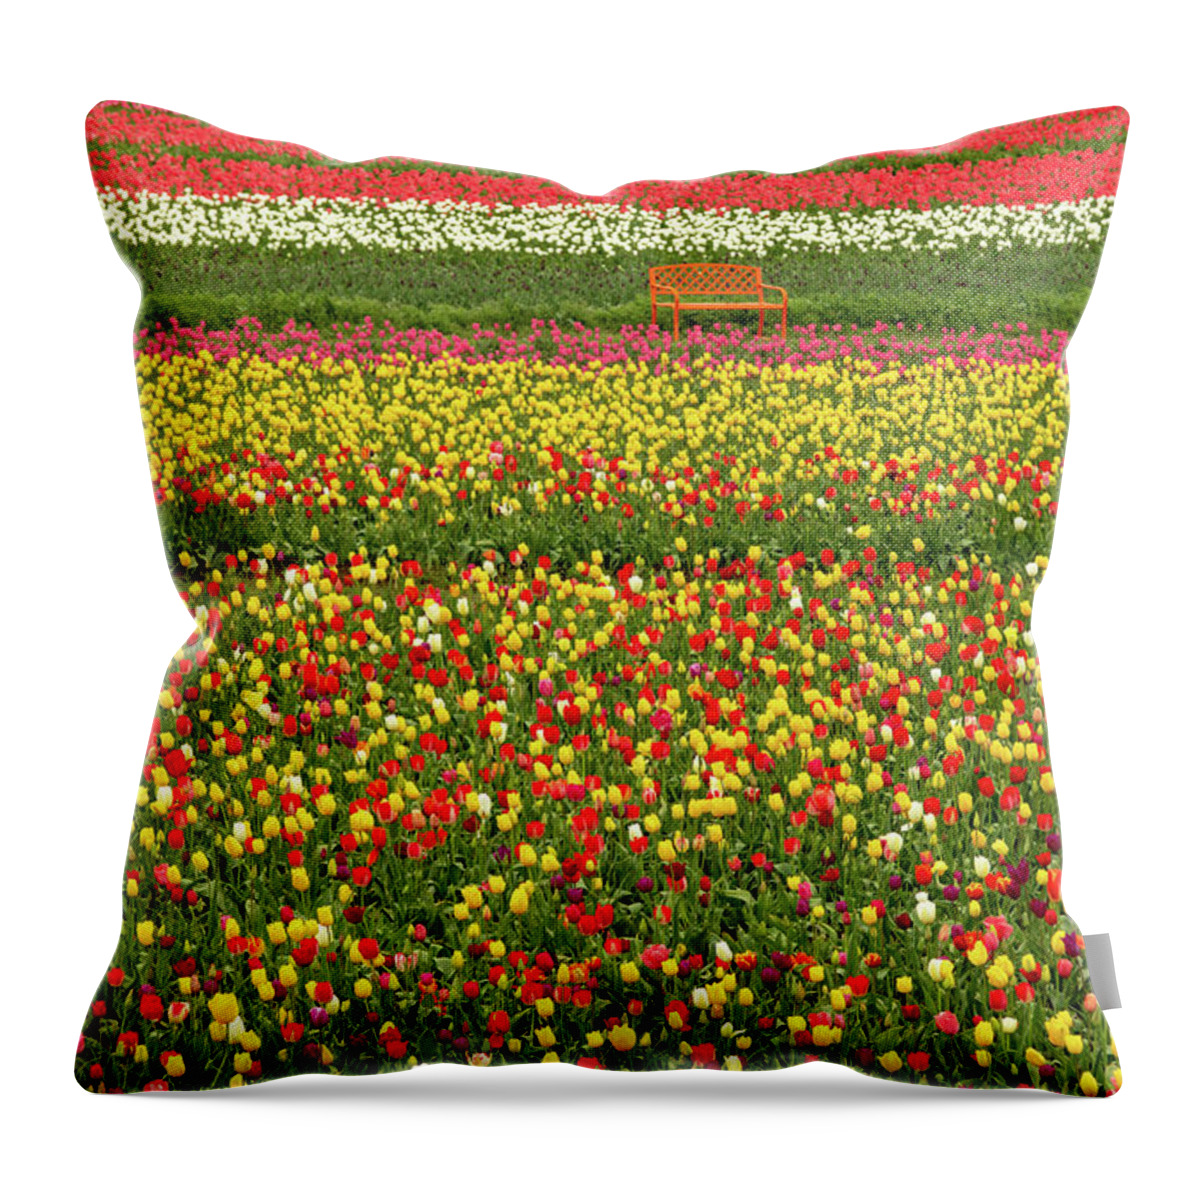 Tulips Throw Pillow featuring the photograph Orange Bench on A Tulip Field by Aashish Vaidya